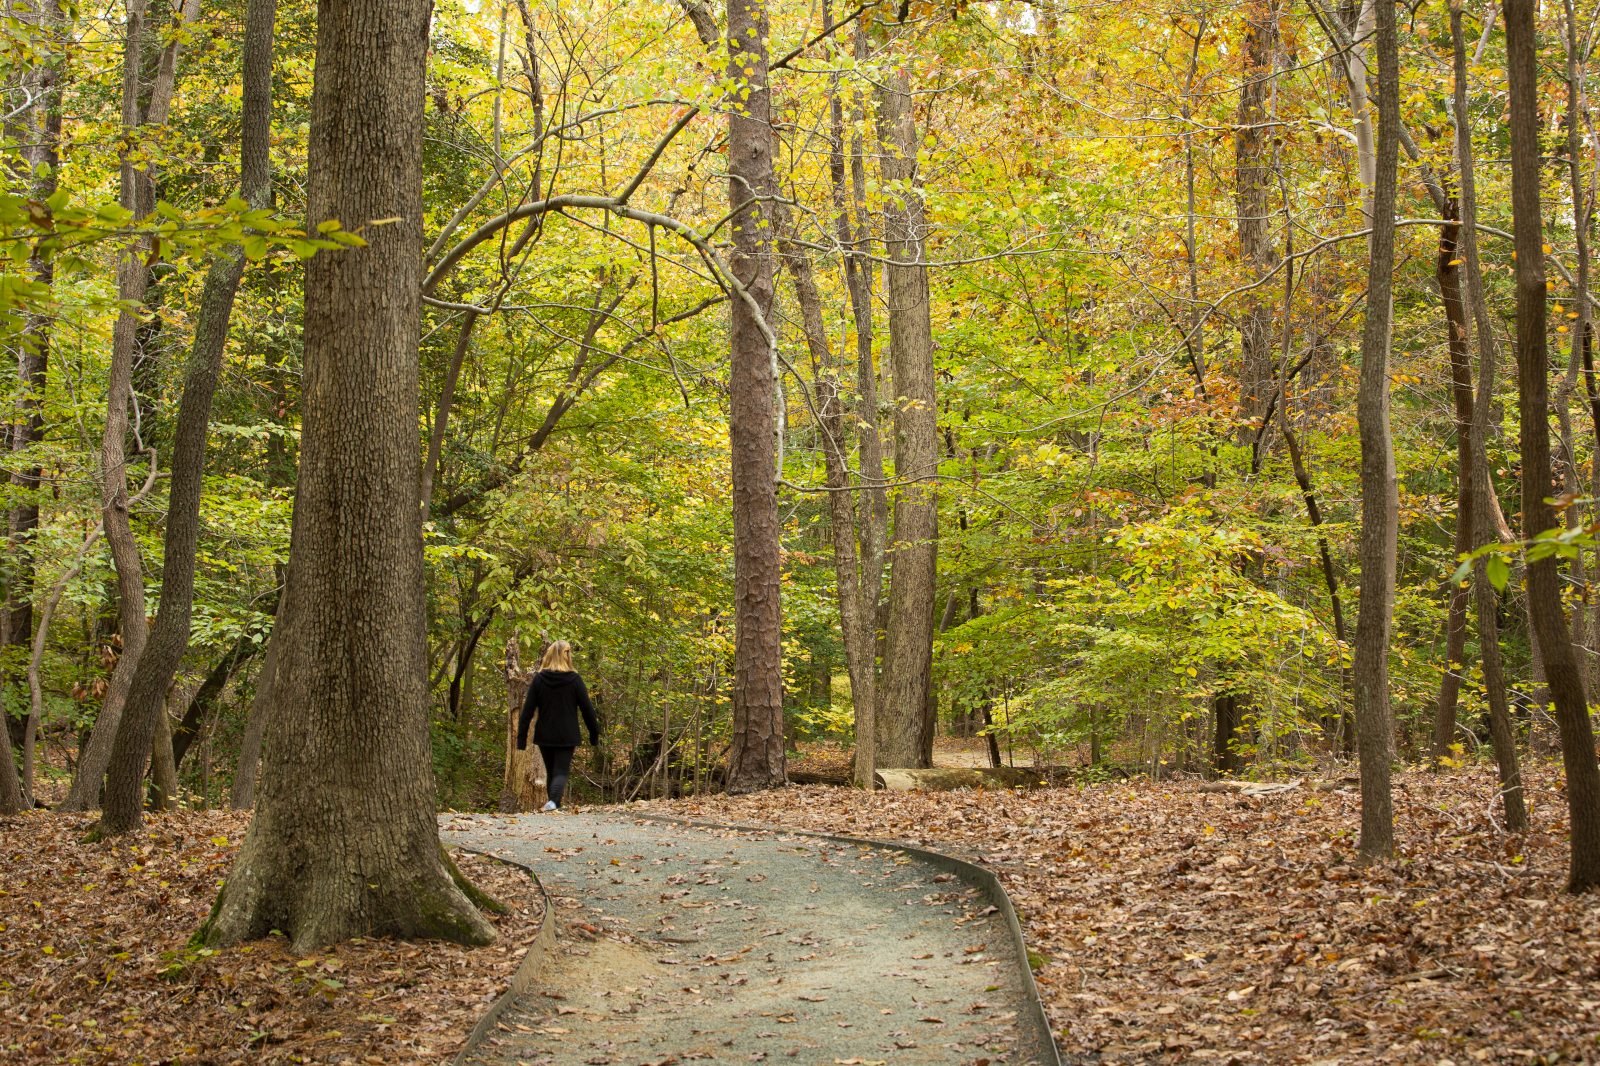 Autumn views in The Mariners' Park where a lady is walking on the Noland Trail.